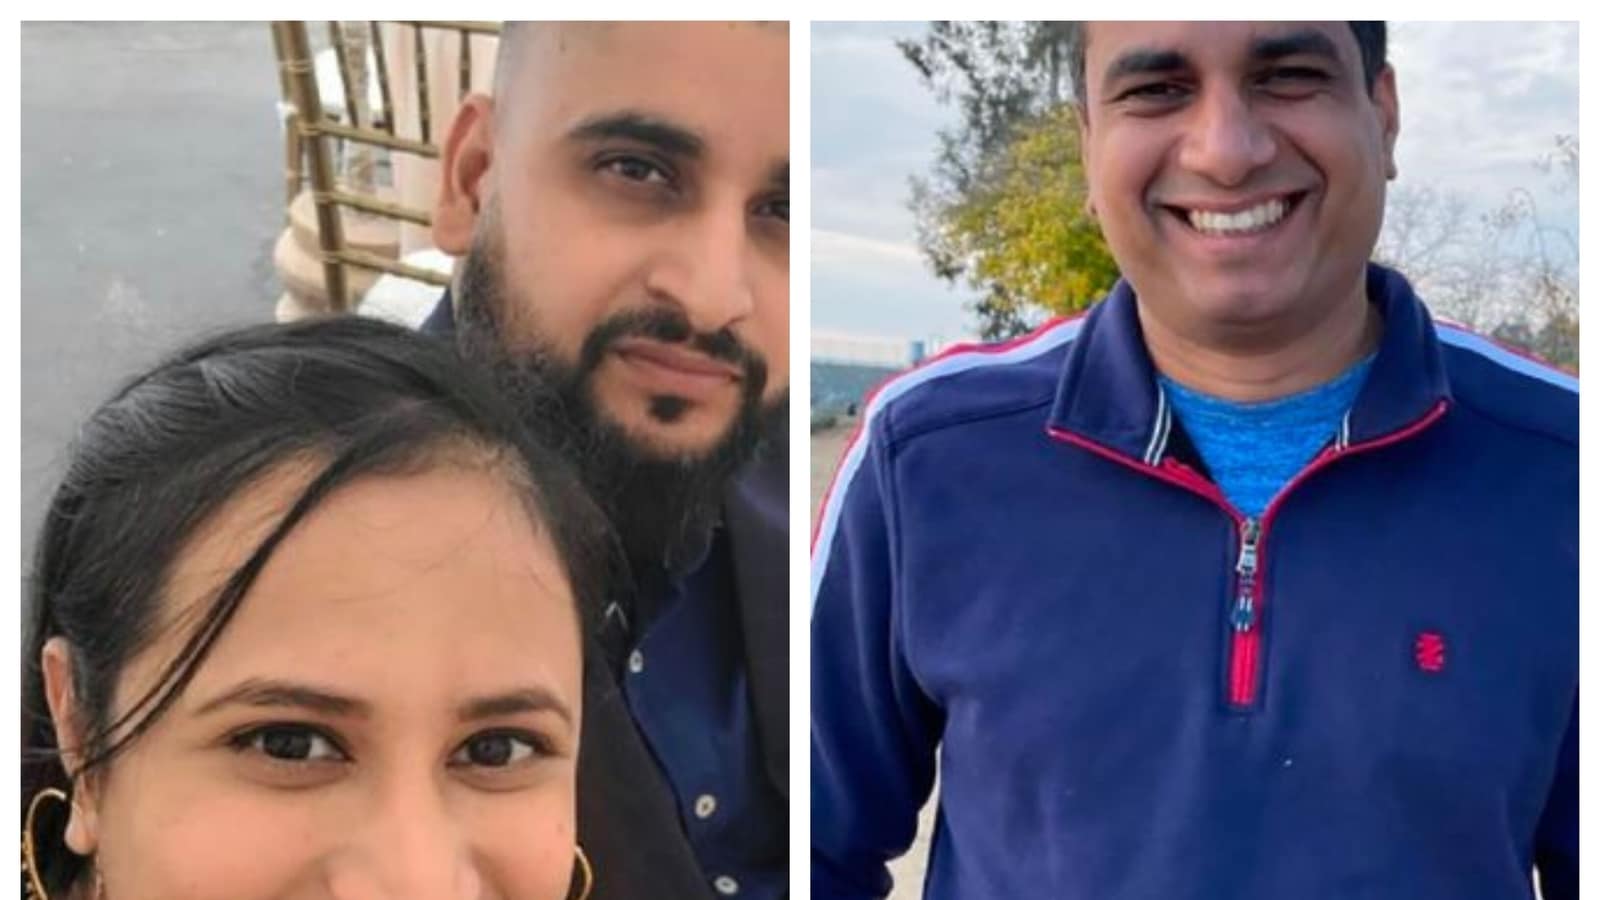 Indian-origin family of 4 who were kidnapped found dead in California |  Latest News India - Hindustan Times